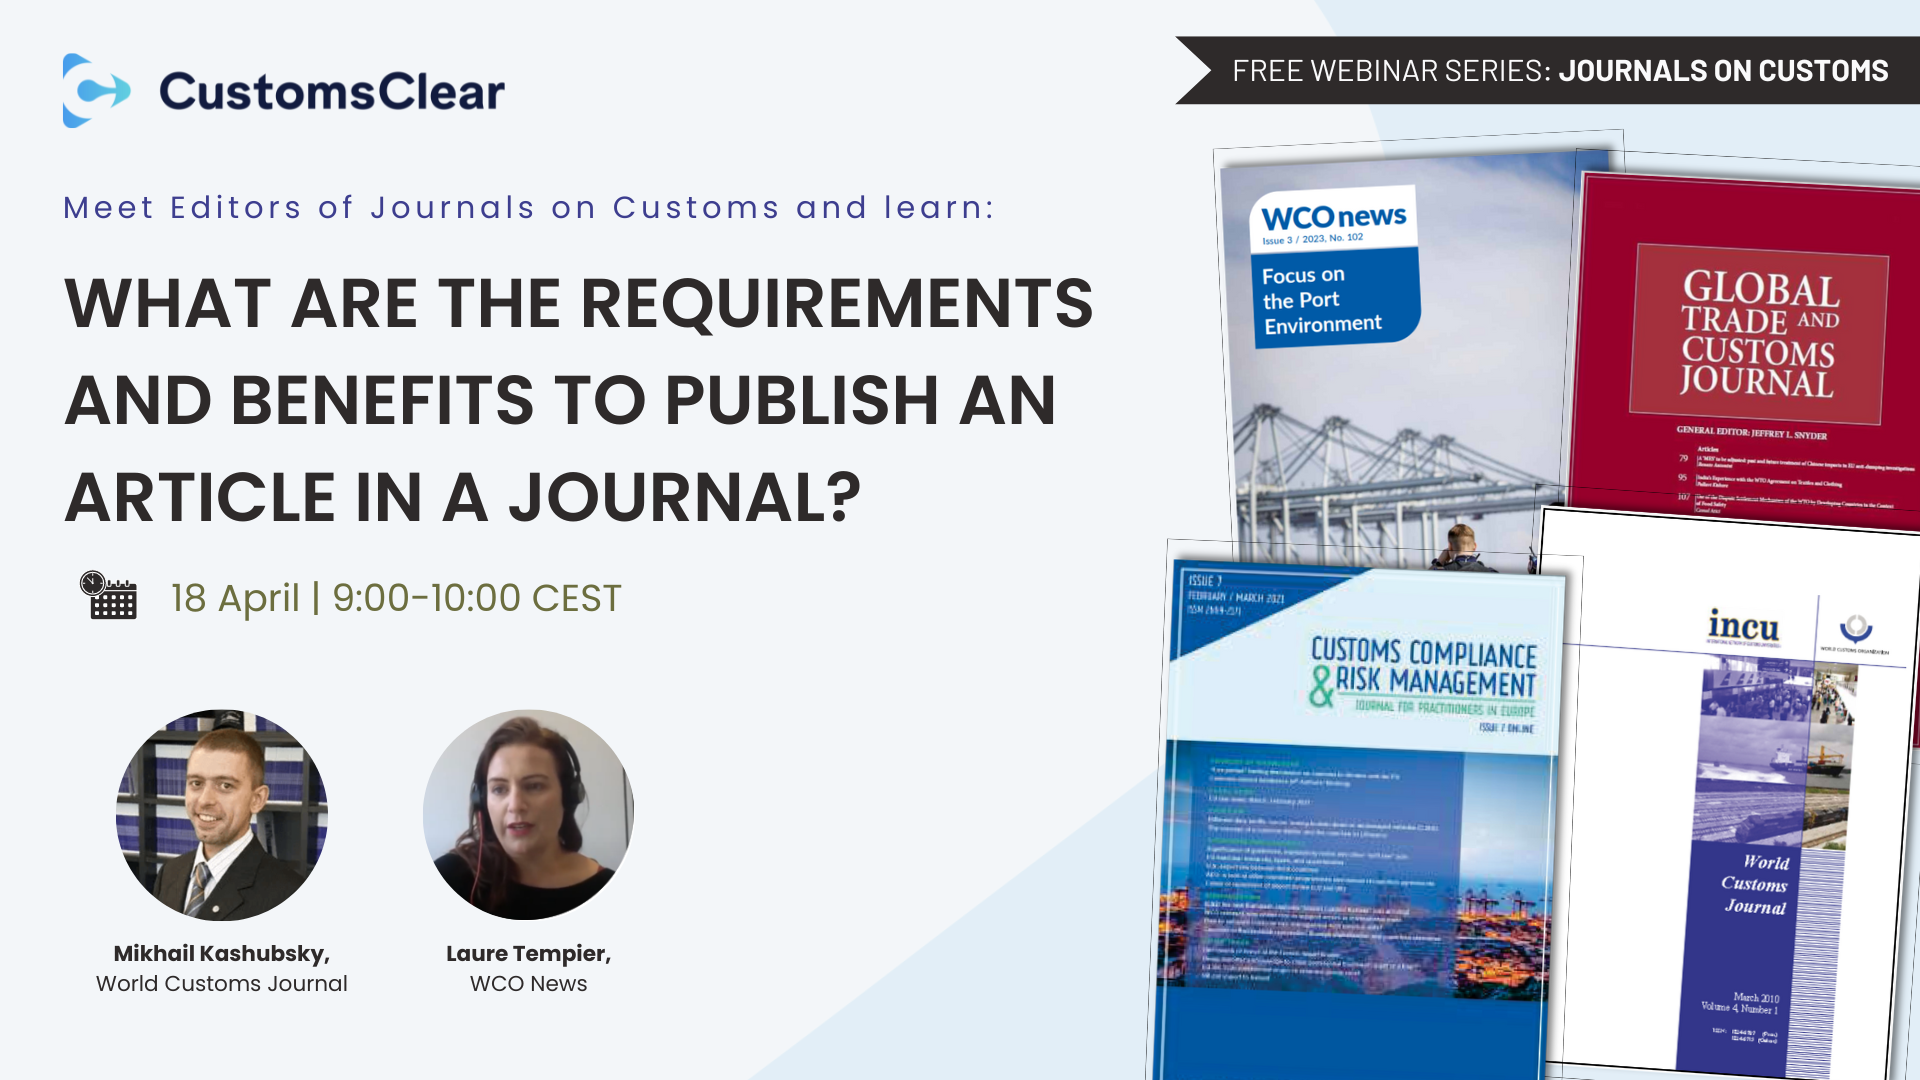 What are the requirements and benefits to publish an article in a journal?